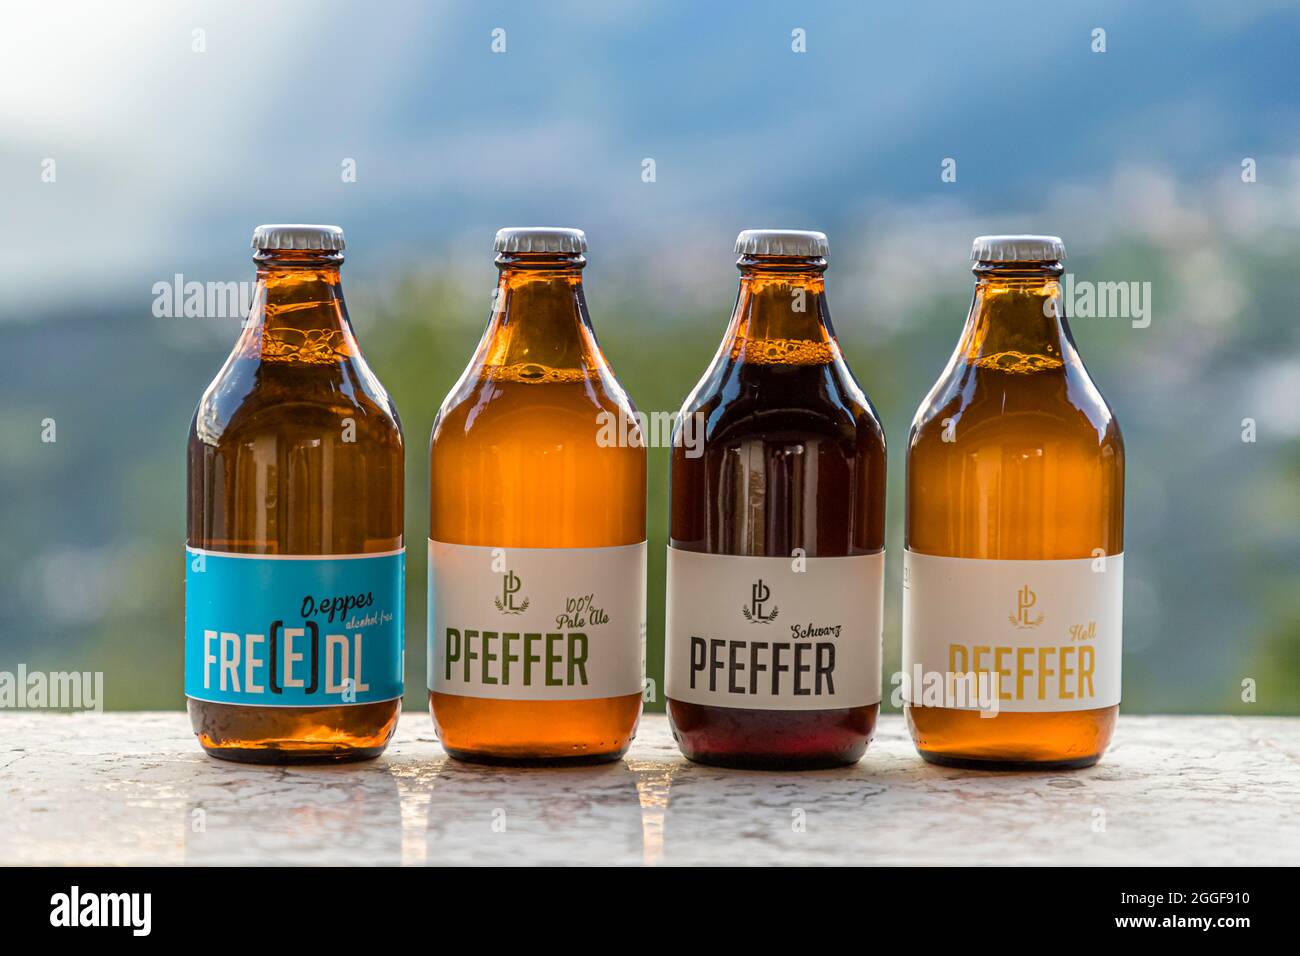 Four different types of bottled beer from the Pfefferlechner home brewery in Lana, South Tyrol, Italy Stock Photo